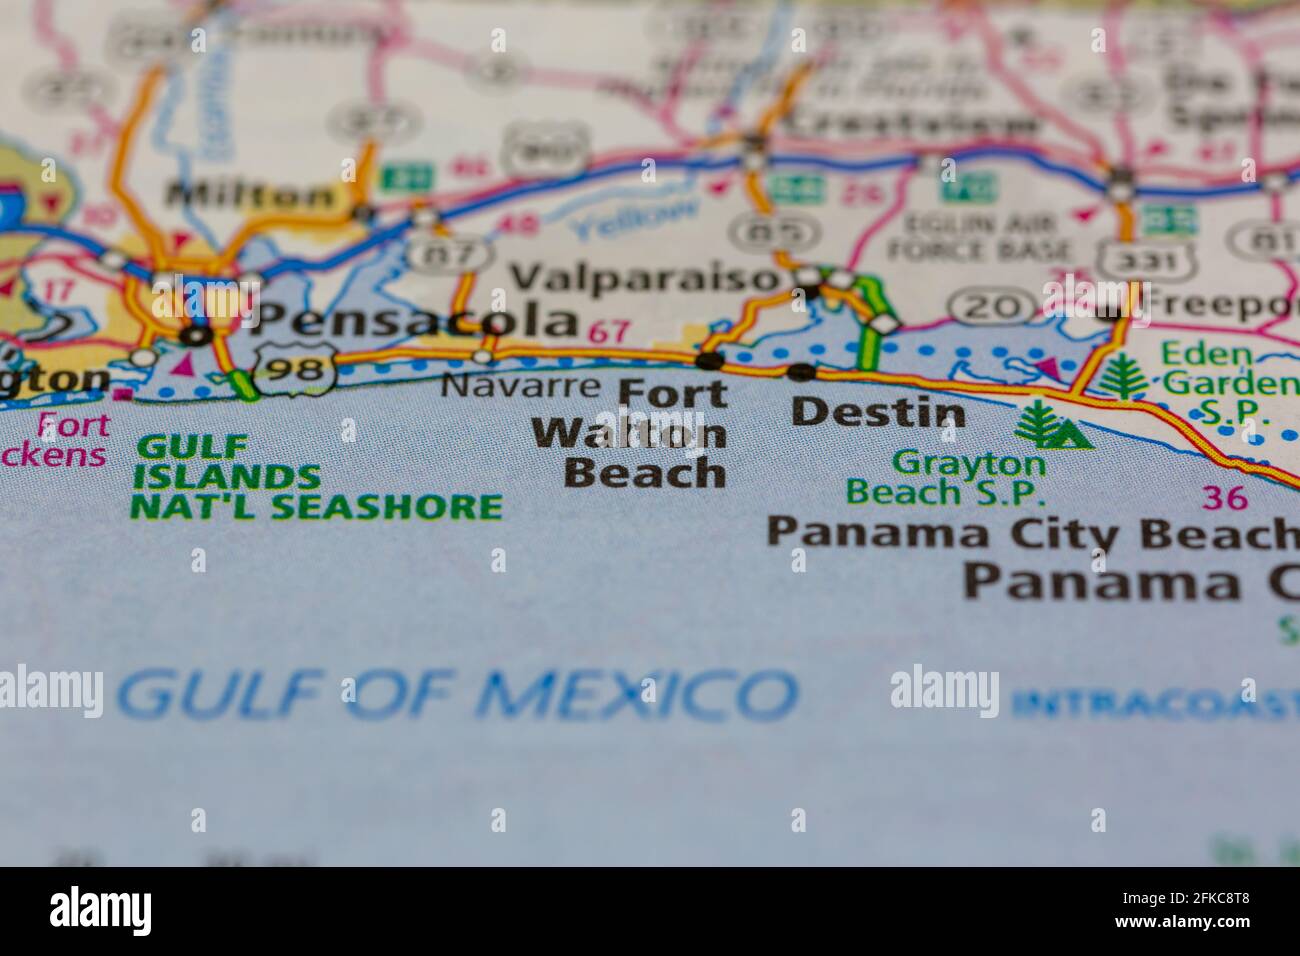 Fort Walton Beach Florida USA Shown on a geography map or road map Stock Photo